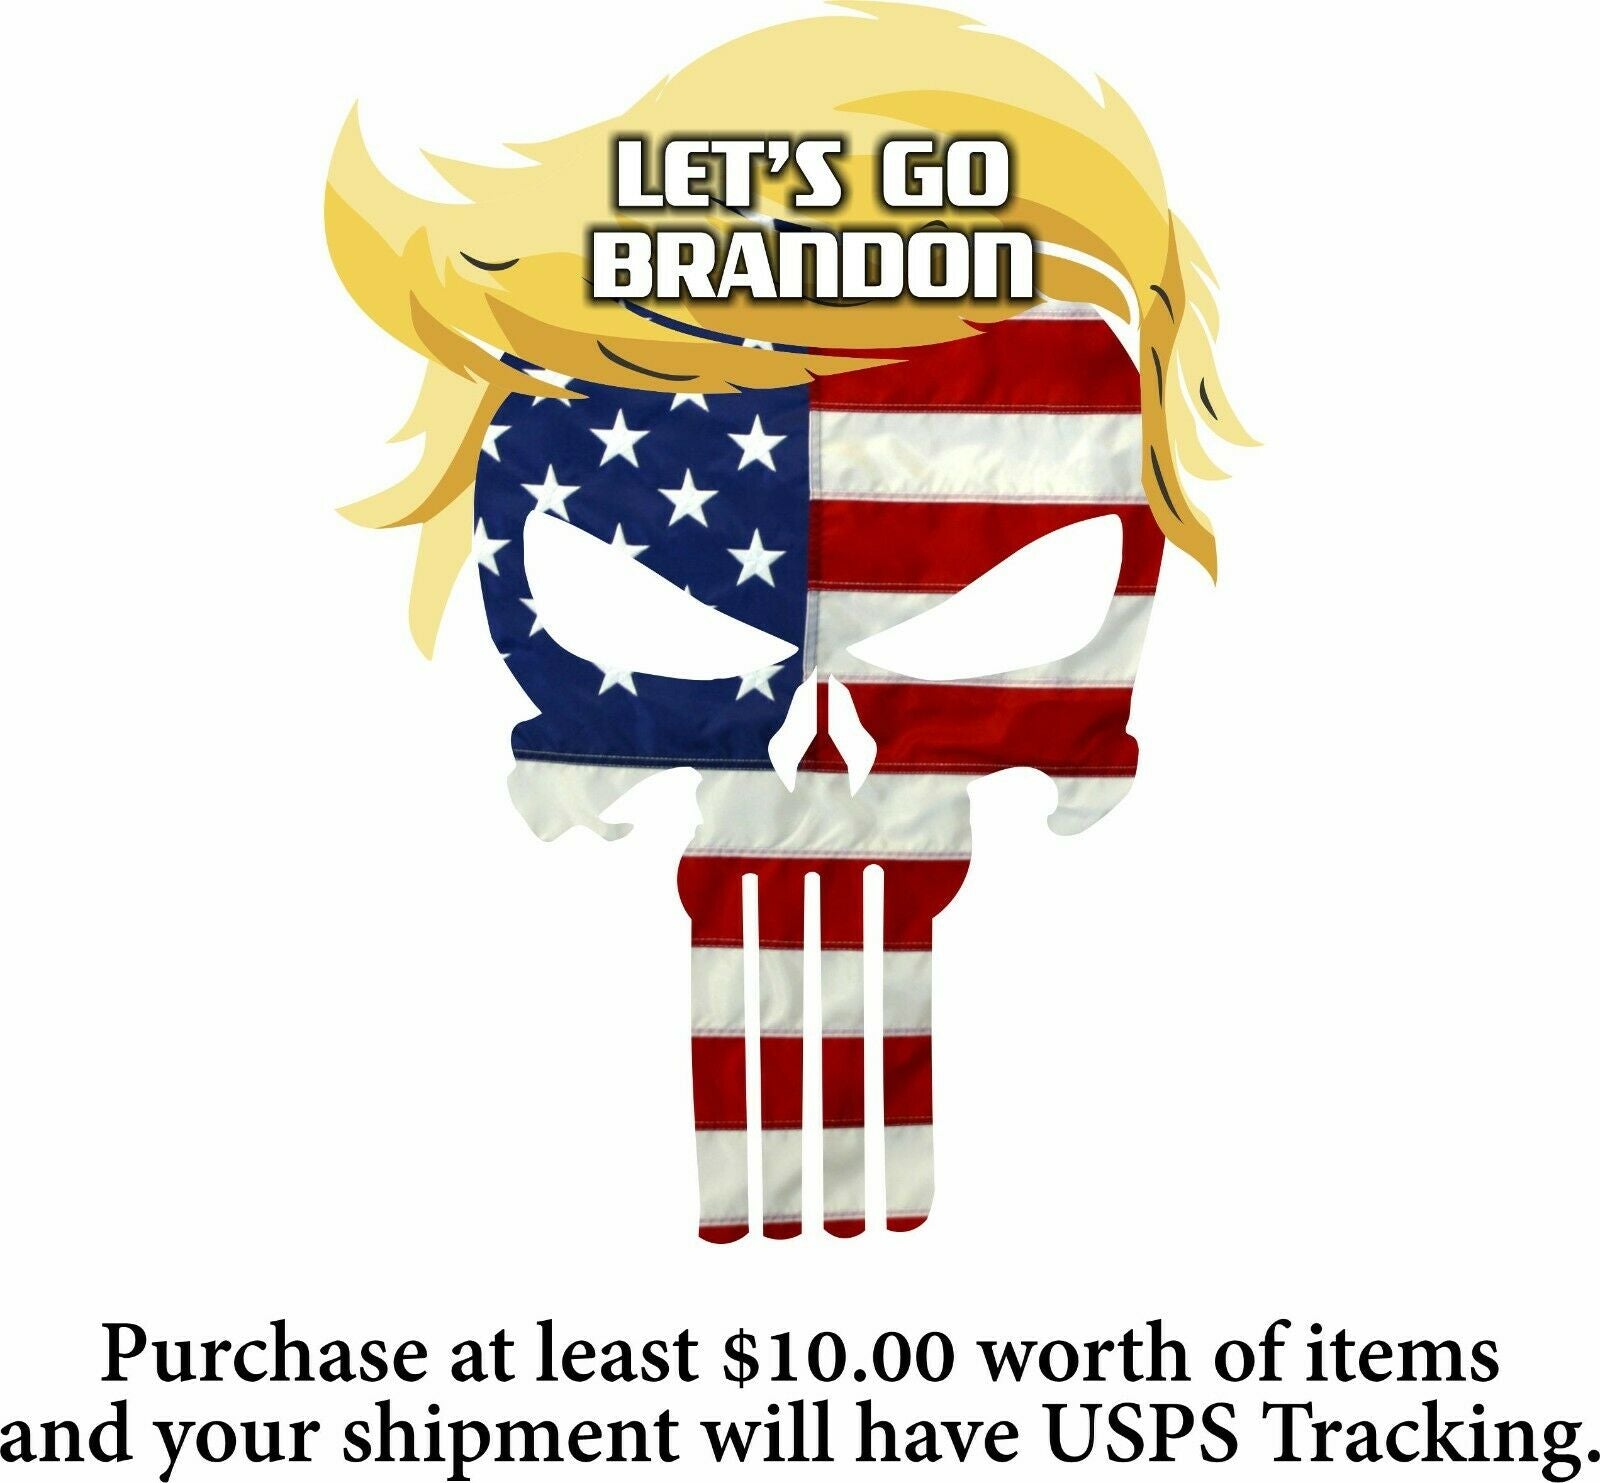 Let's Go Brandon Decal - USA Trump Punisher Let's Go Brandon Decal